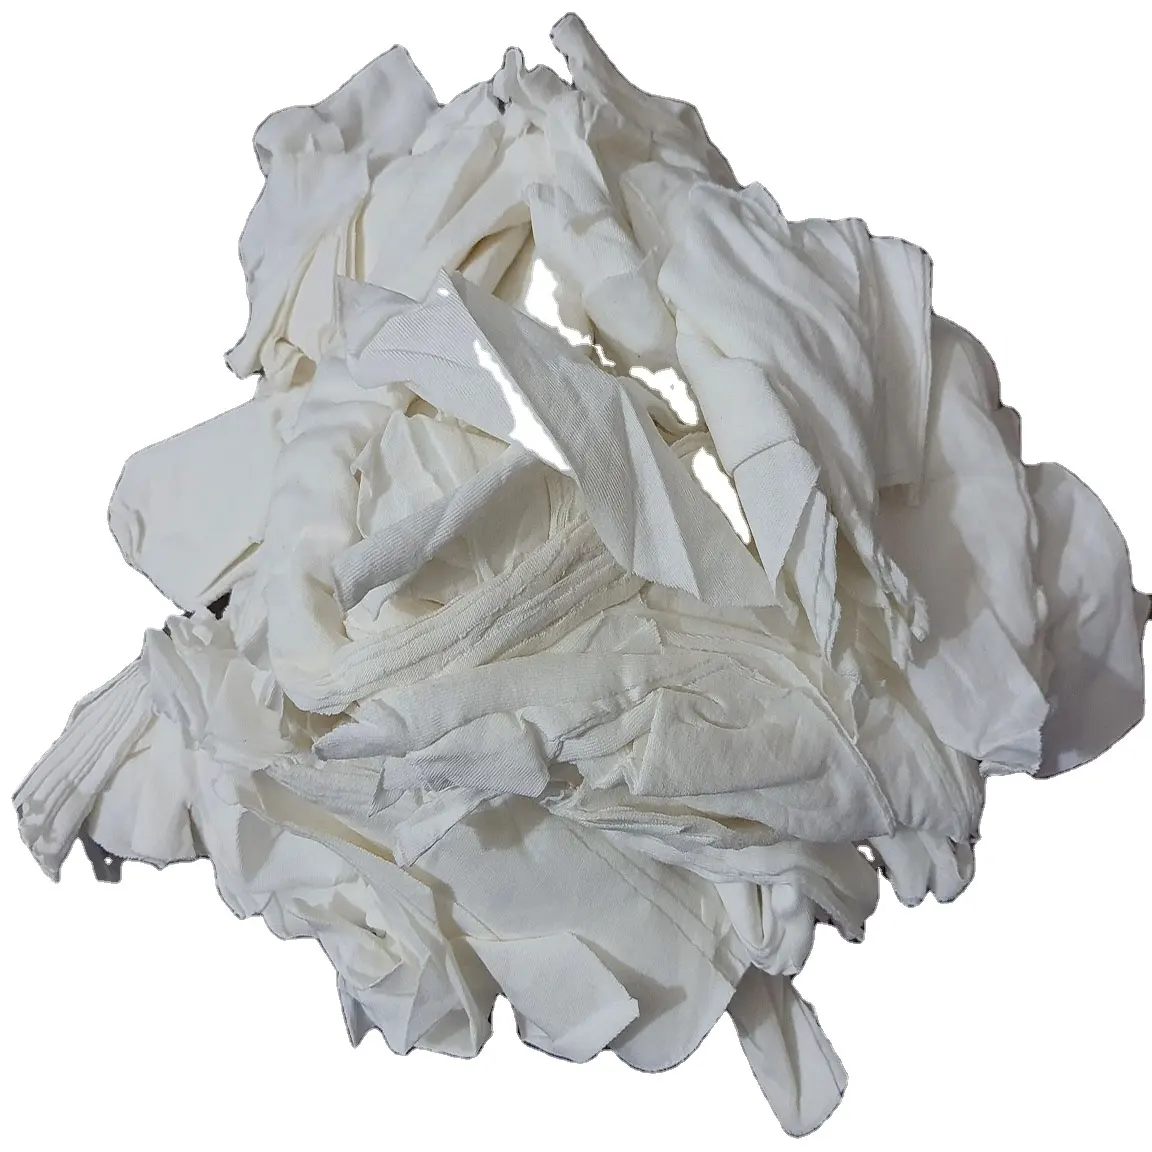 Of White Cotton Knit Fabrics Waste Hosiery fabrics rags Best quality from Bangladesh Recycle Fabric Waste